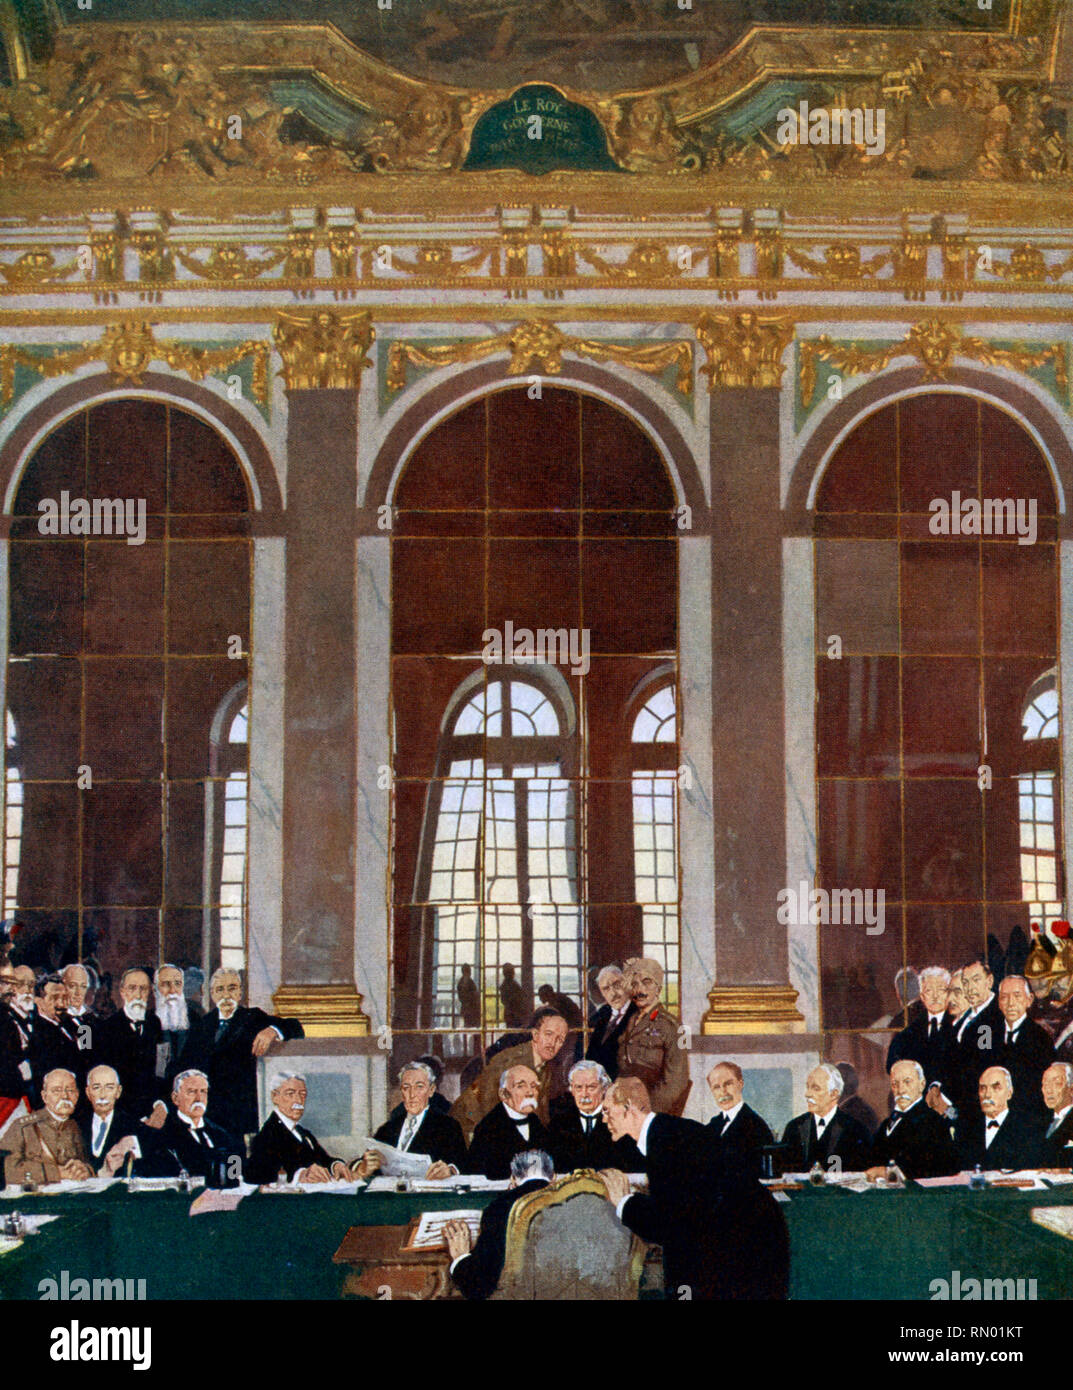 The Signing of the Peace in the Hall of Mirrors, Versailles, 28th June, 1919. By William Orpen (1878-1931). The Treaty of Versailles (Traité de Versailles) was the most important of the peace treaties that brought World War I to an end. Stock Photo